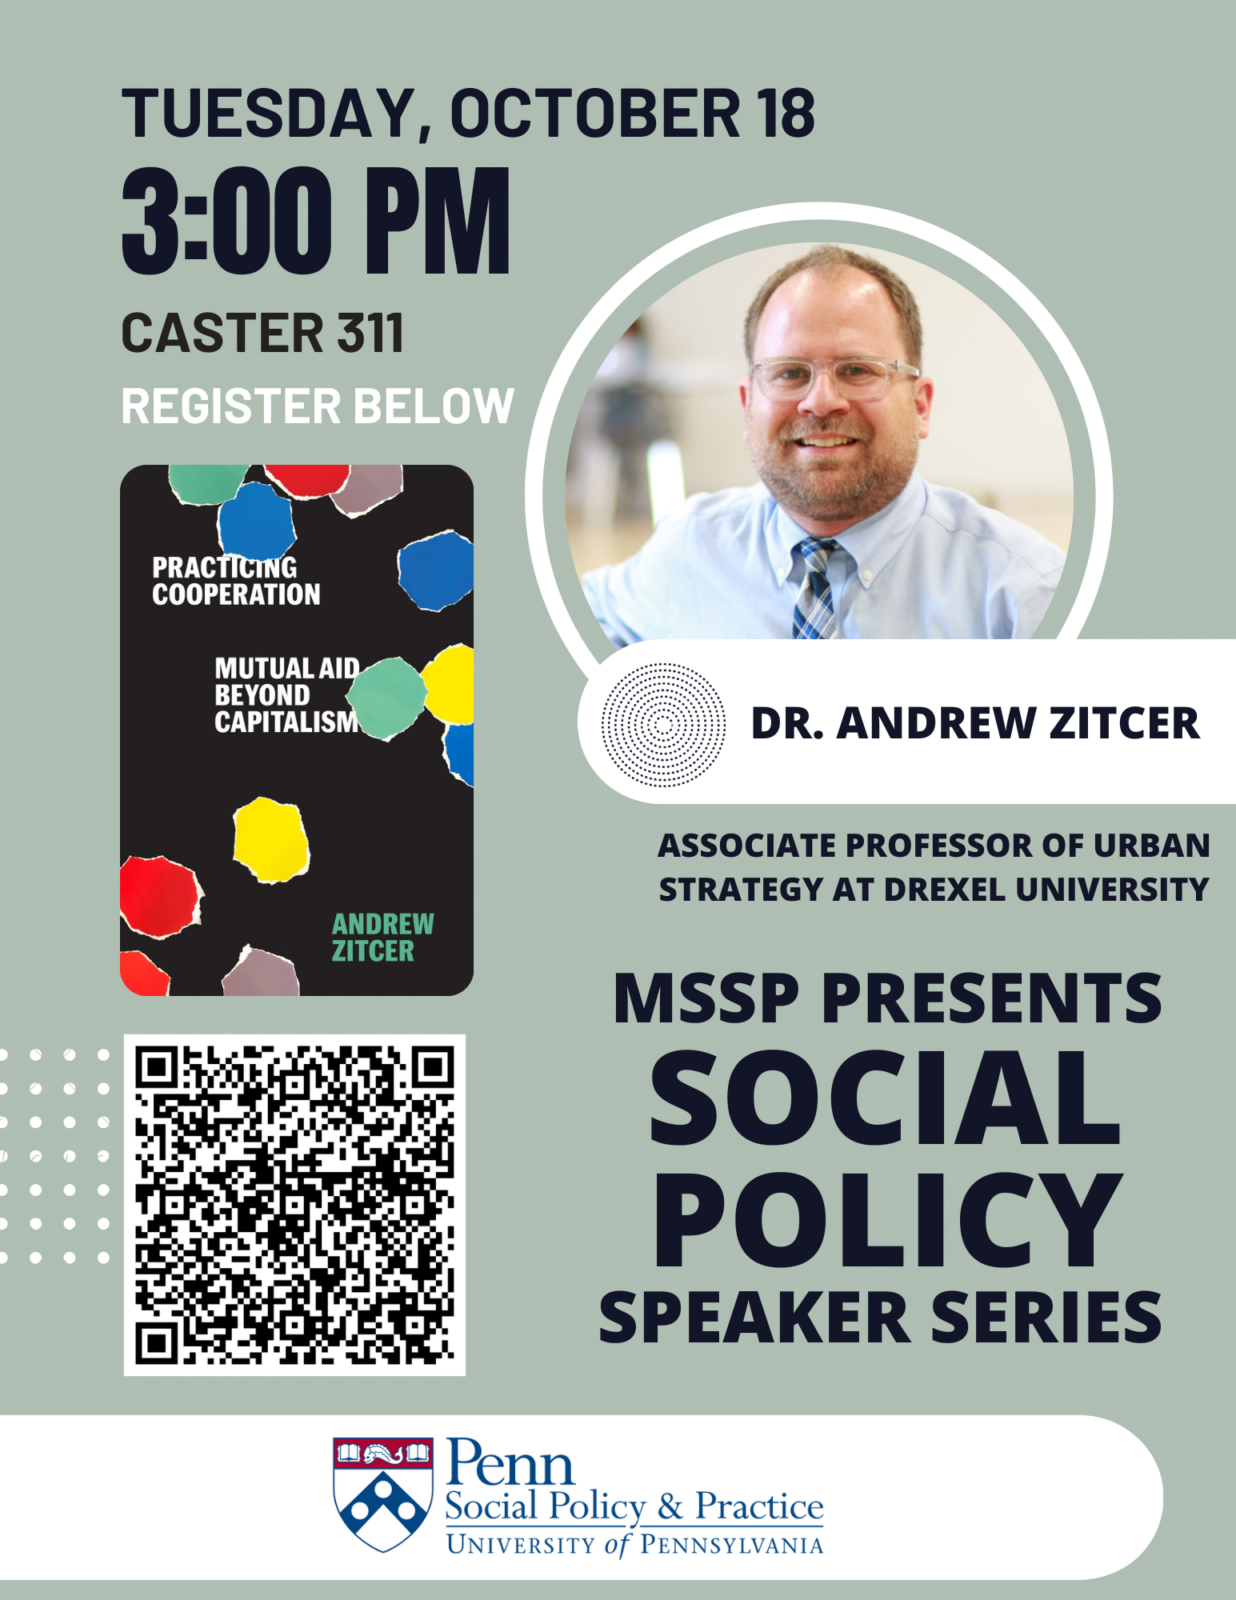 Social Policy Speaker Series featuring Dr. Andrew Zitcer flyer